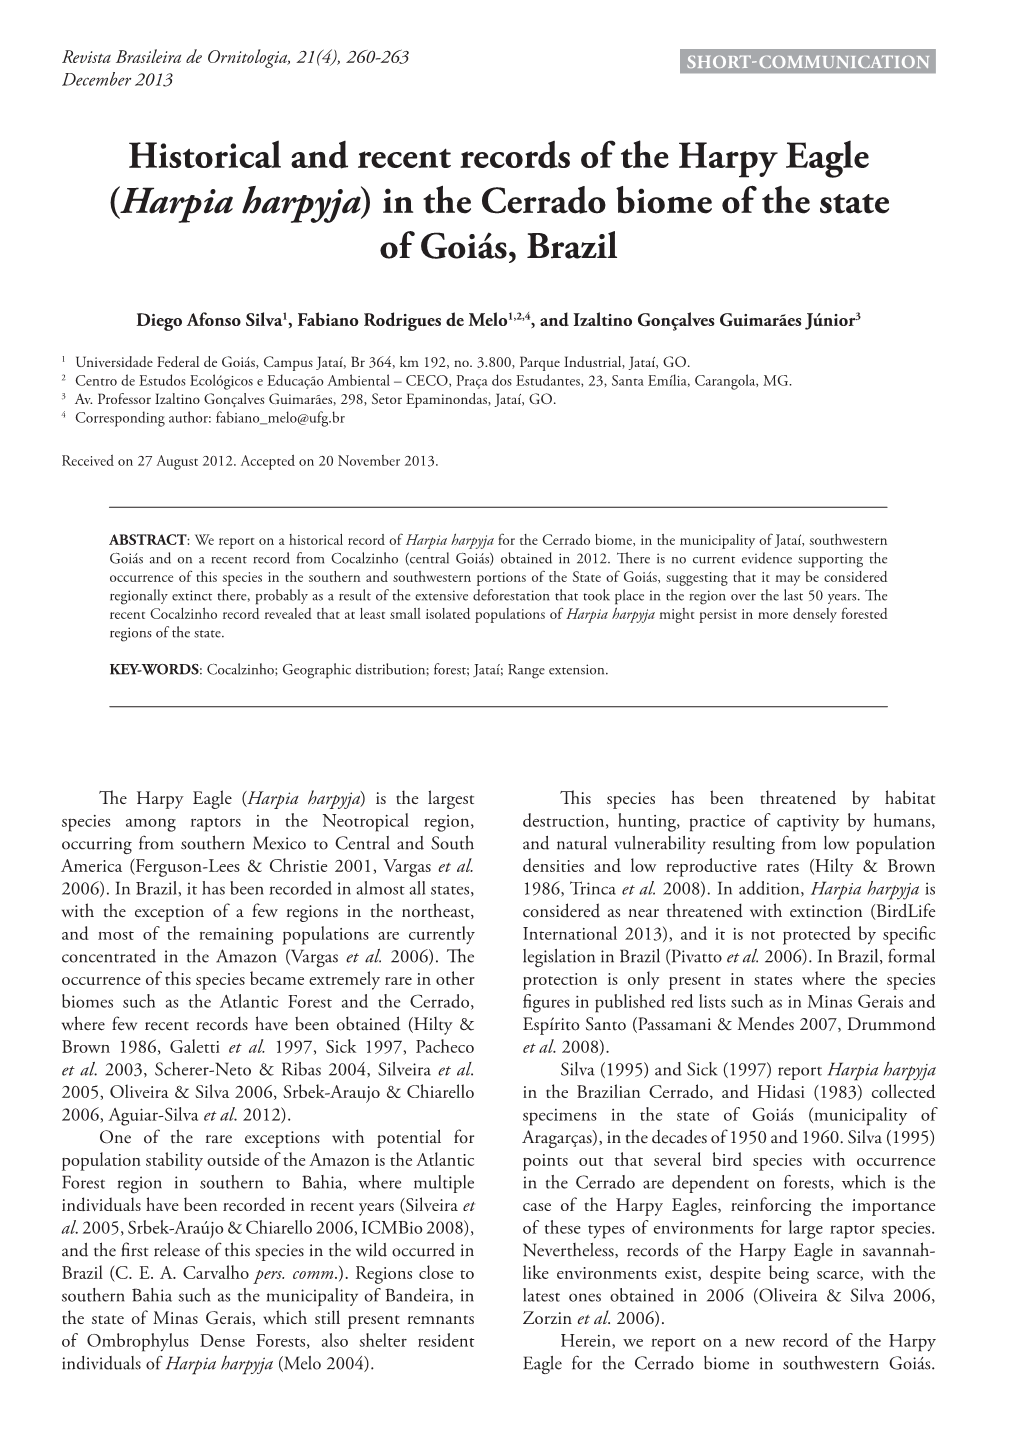 Historical and Recent Records of the Harpy Eagle (Harpia Harpyja) in the Cerrado Biome of the State of Goiás, Brazil